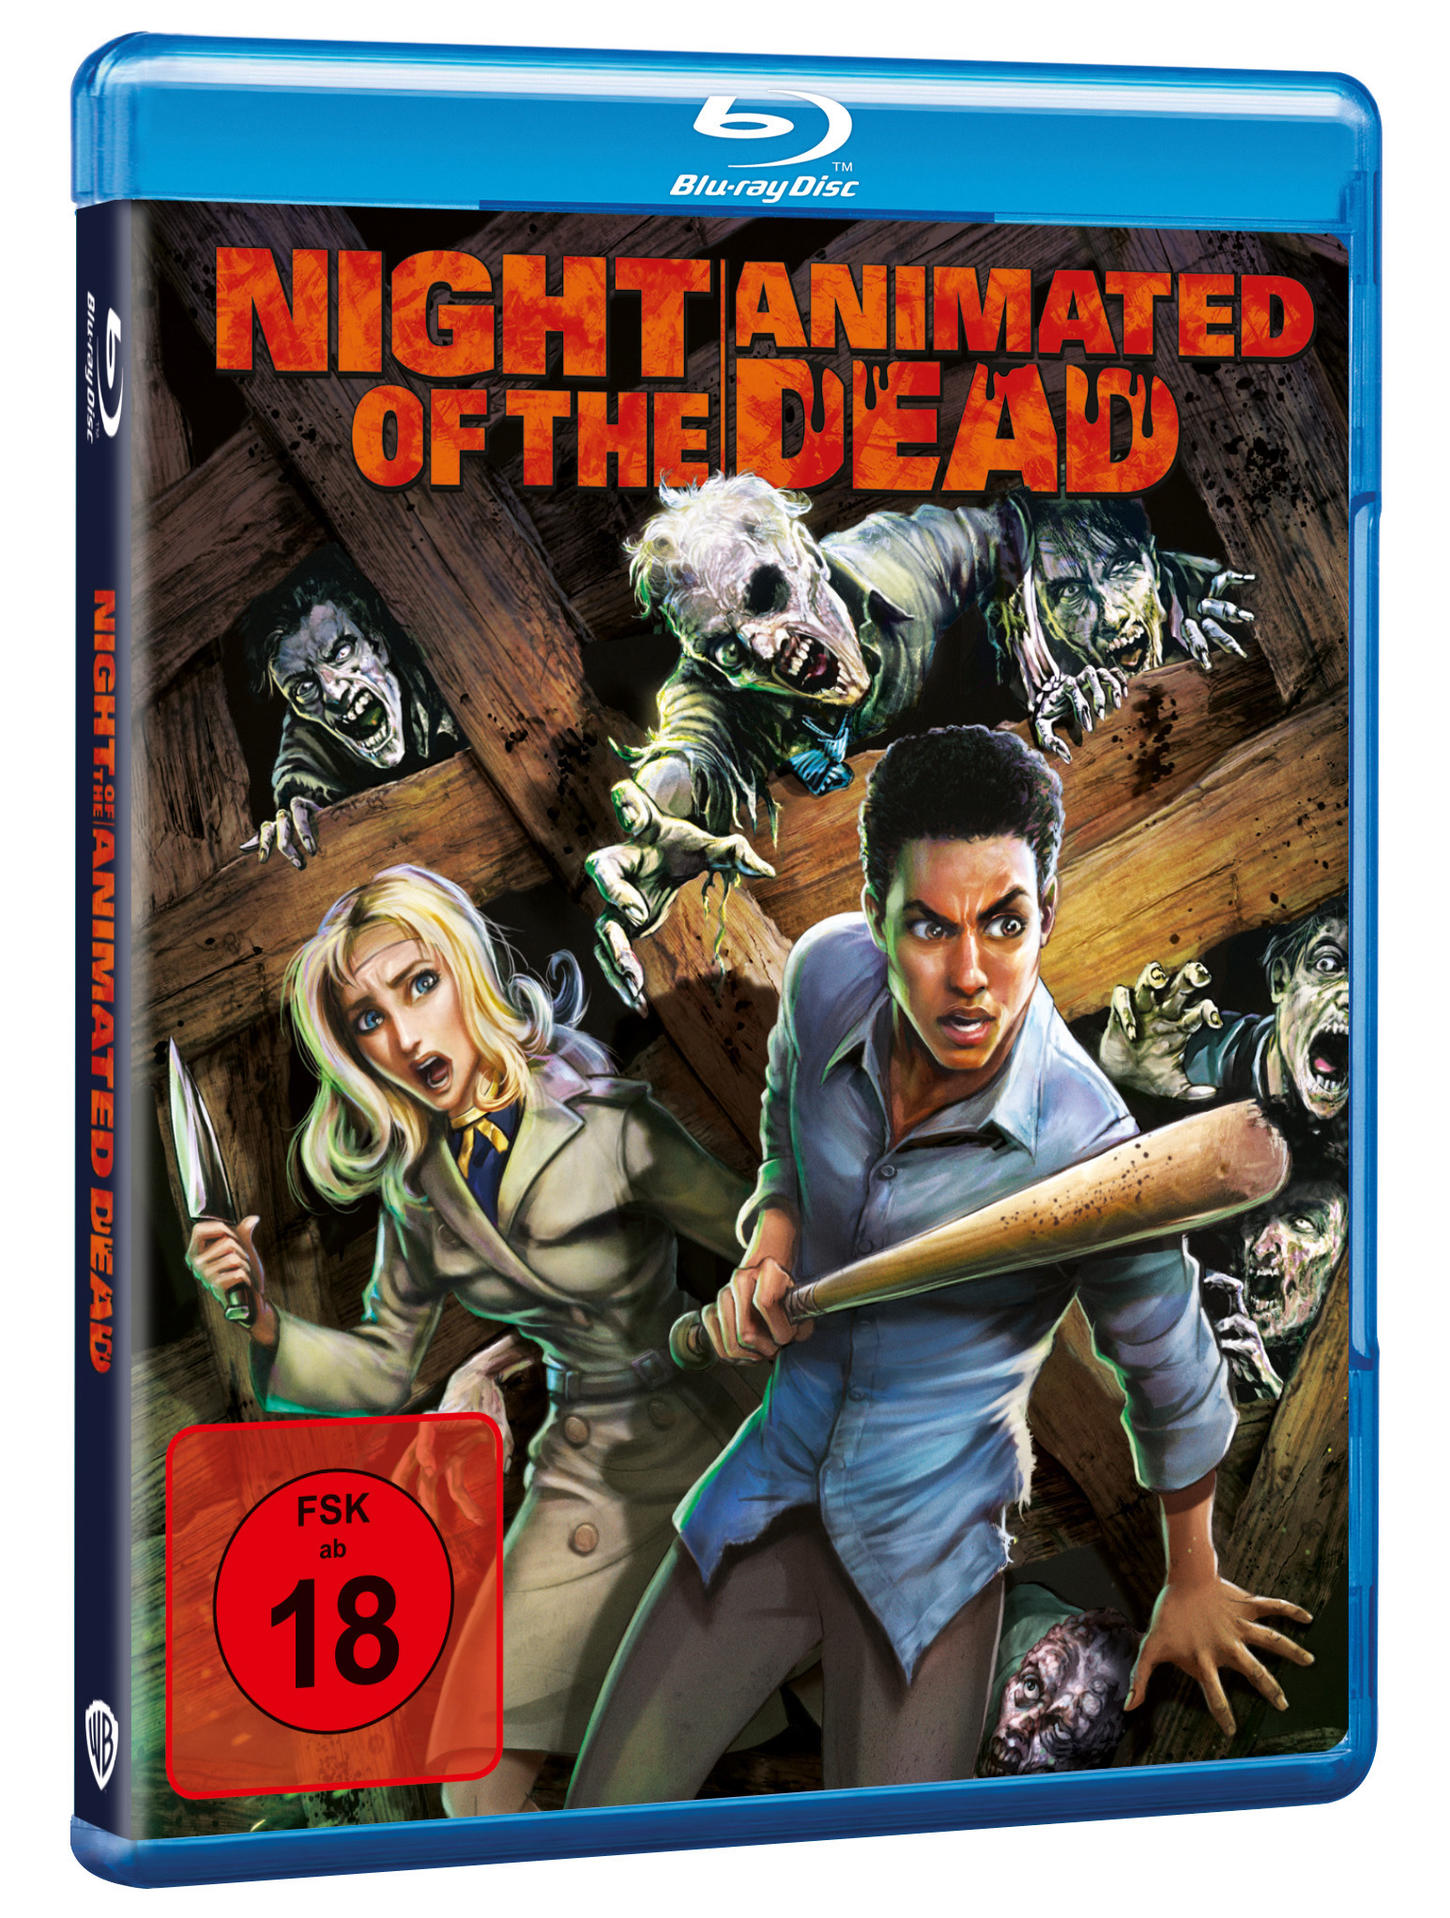 of Animated Night the Dead Blu-ray